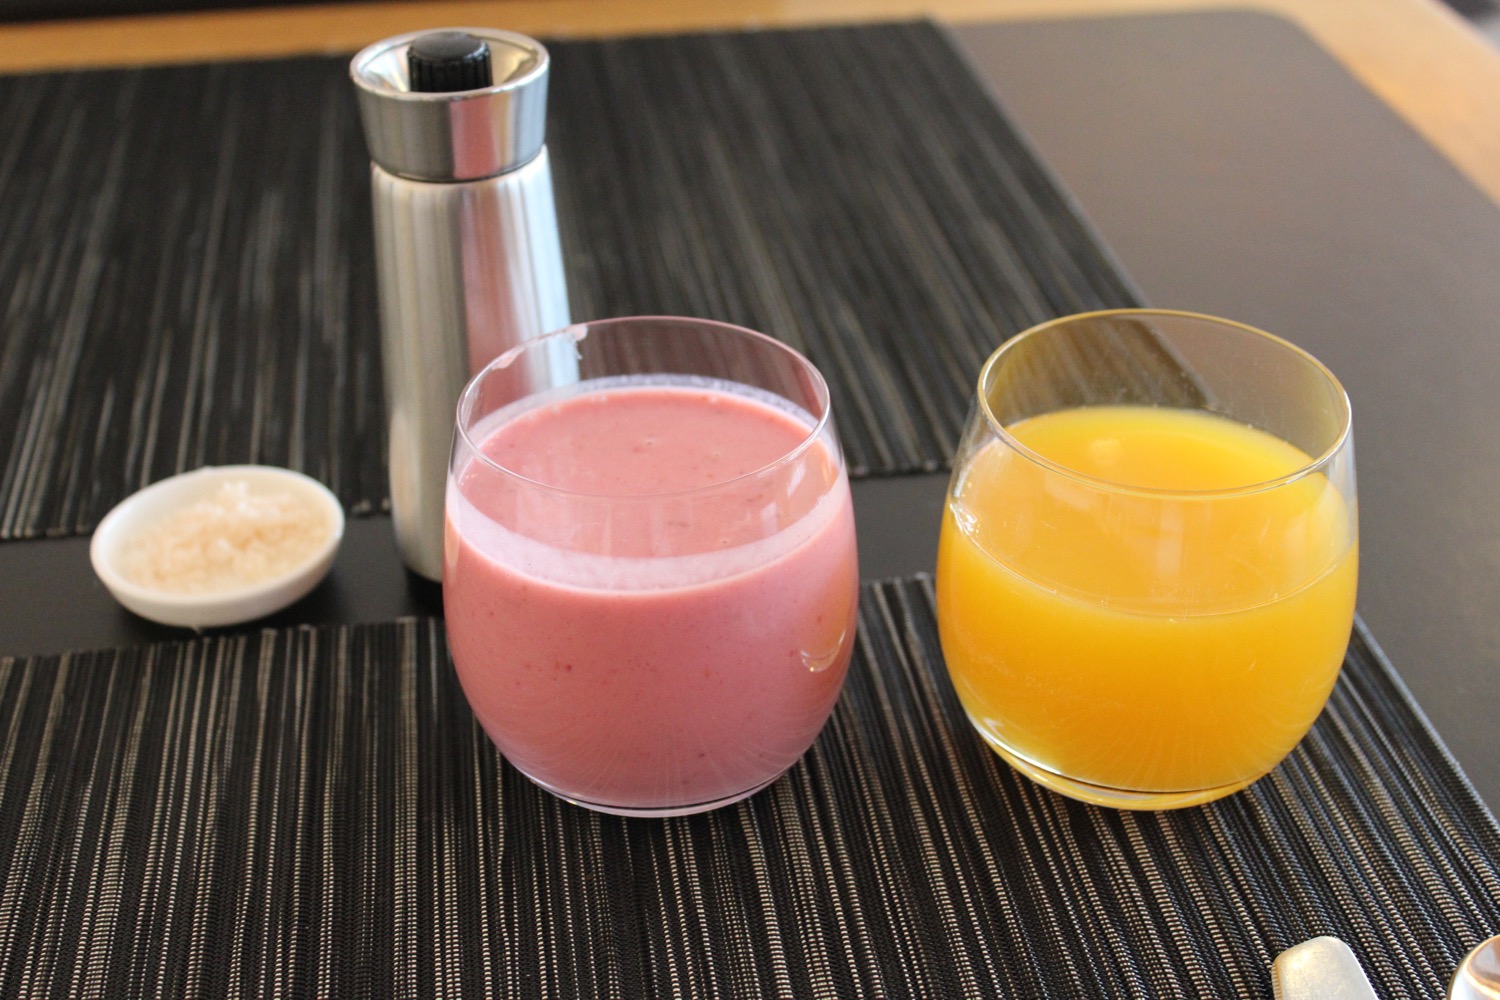 a glass of juice and a shaker on a place mat